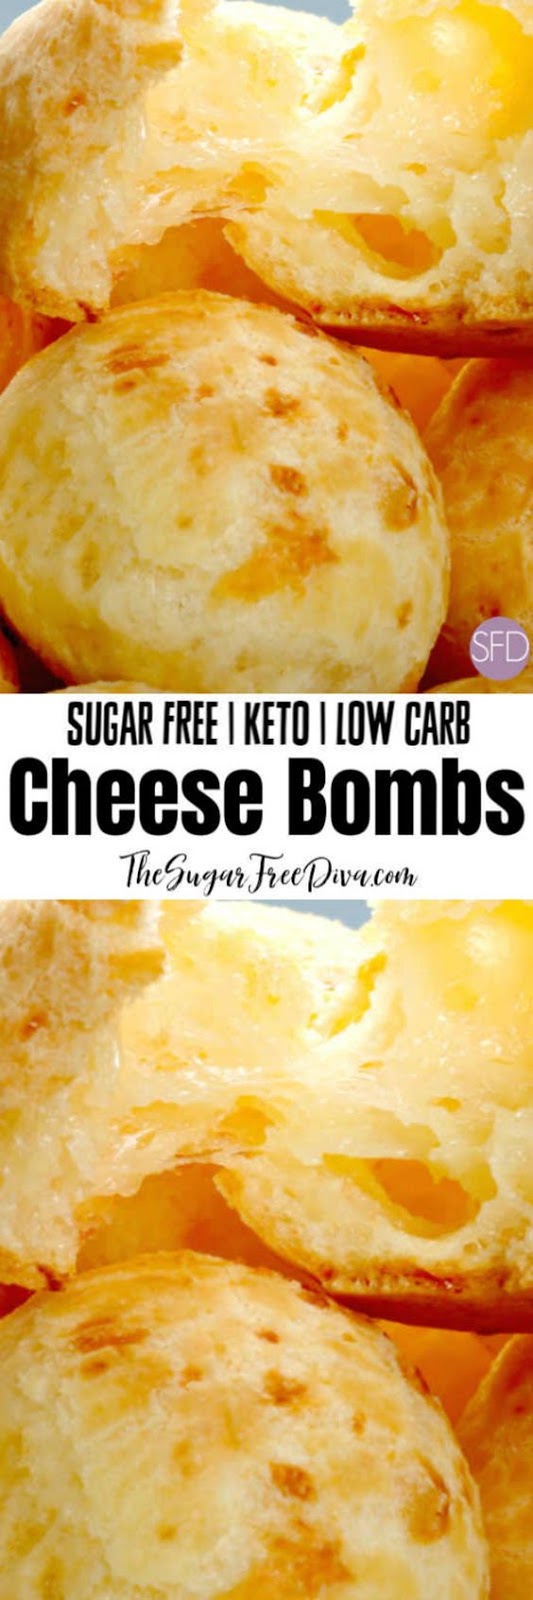 EASY LOW CARB CHEESE BOMBS